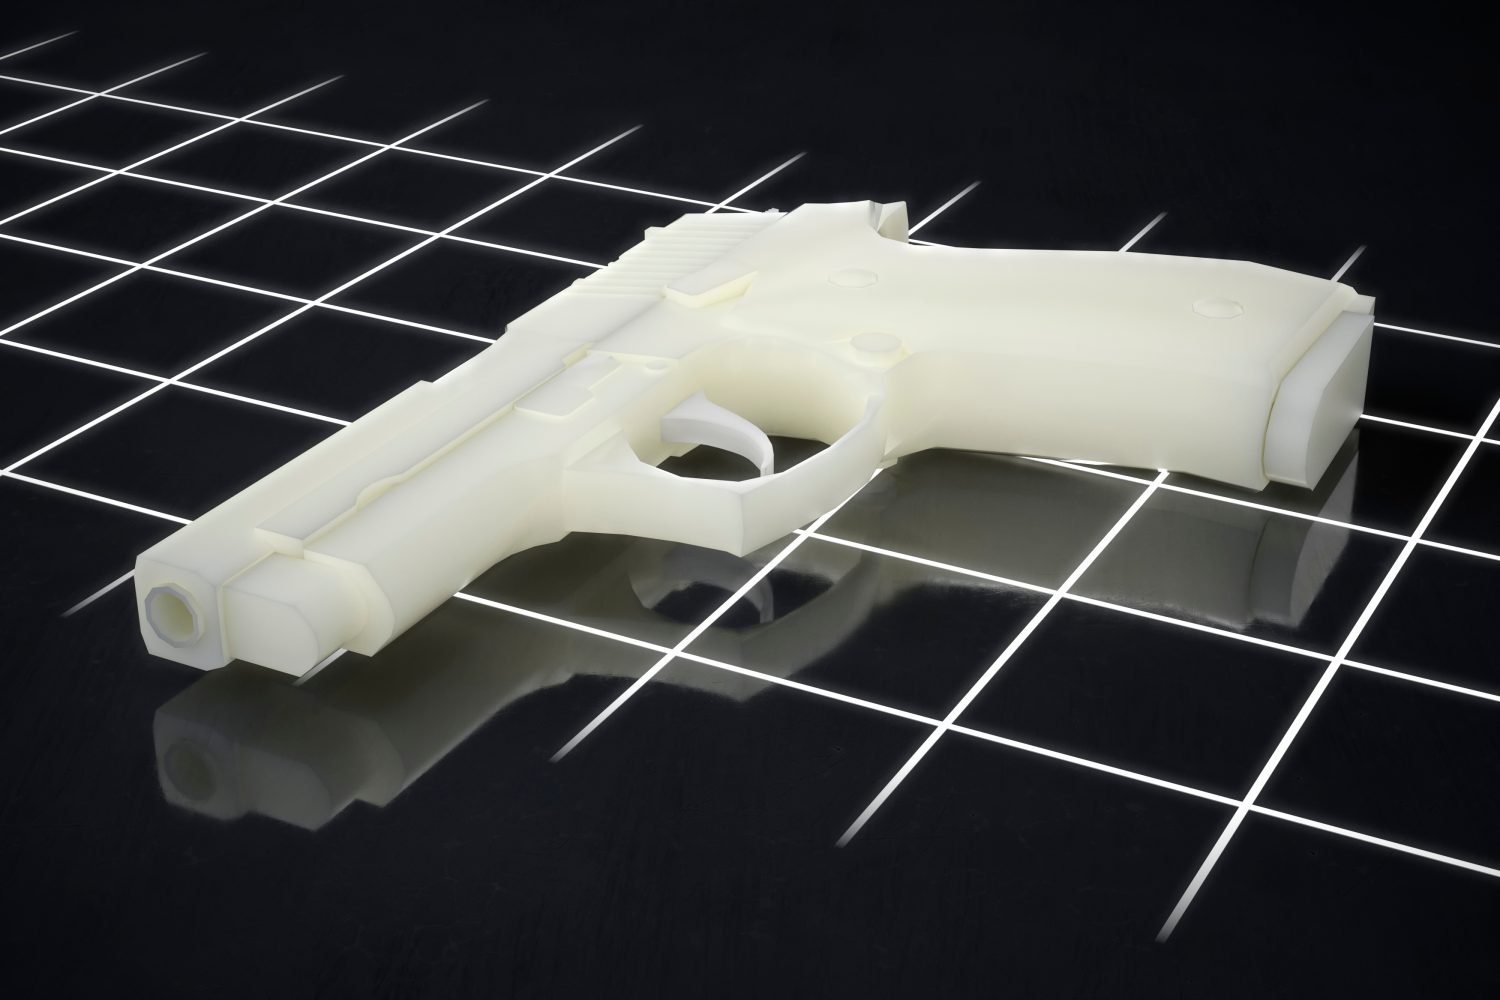 Trigger Warning: Why The 3D-Printed Gun Debate Matters To Crypto